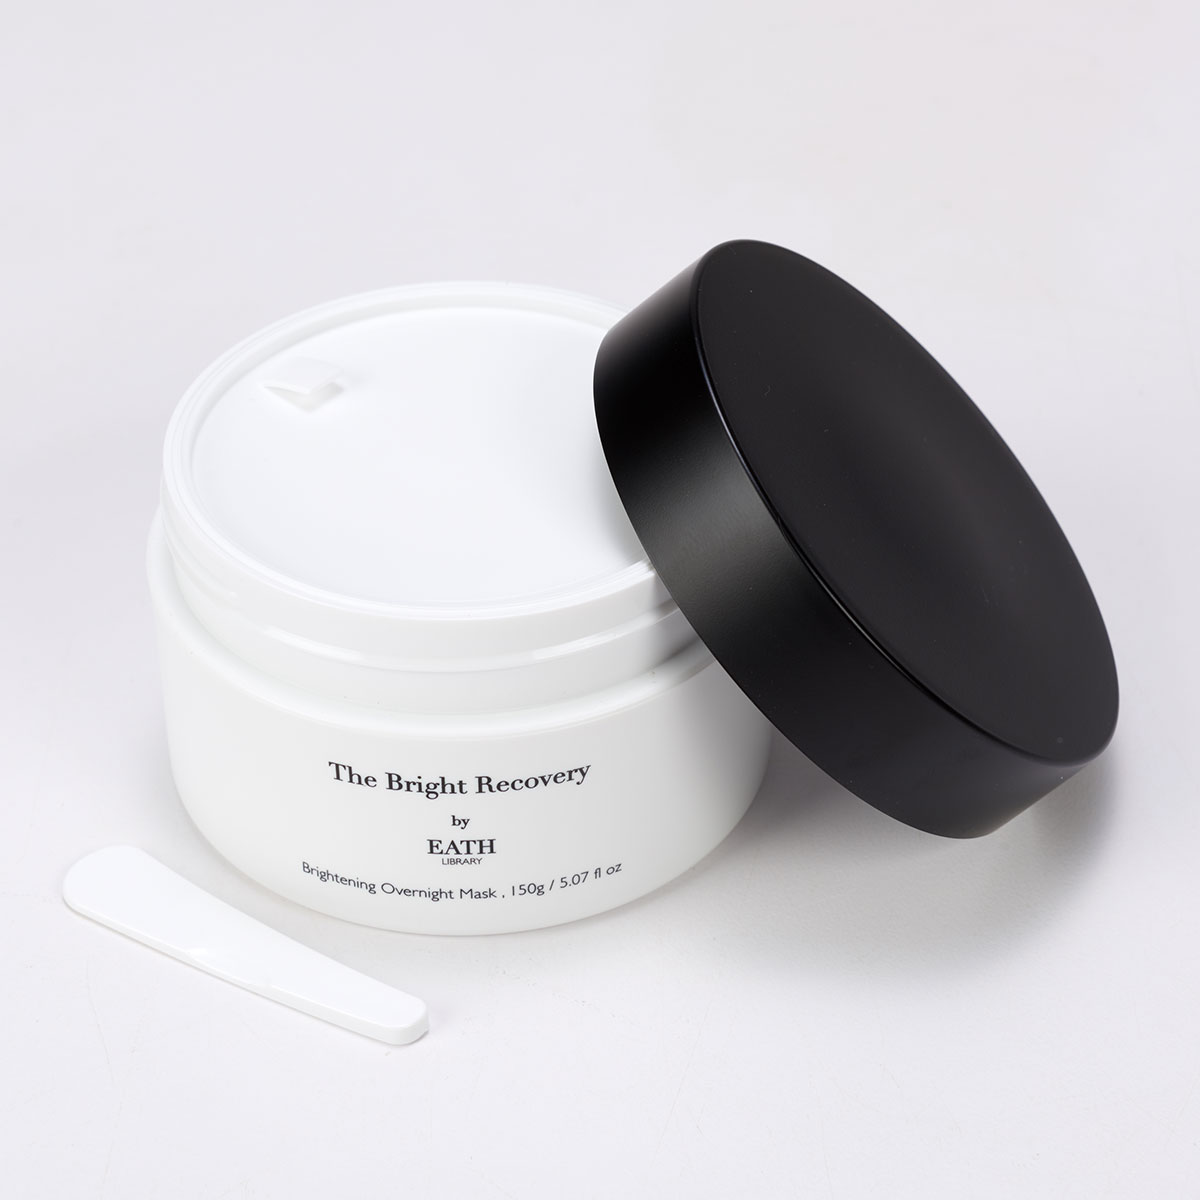 Image shows the EATH LIBRARY Brightening Overnight Mask.